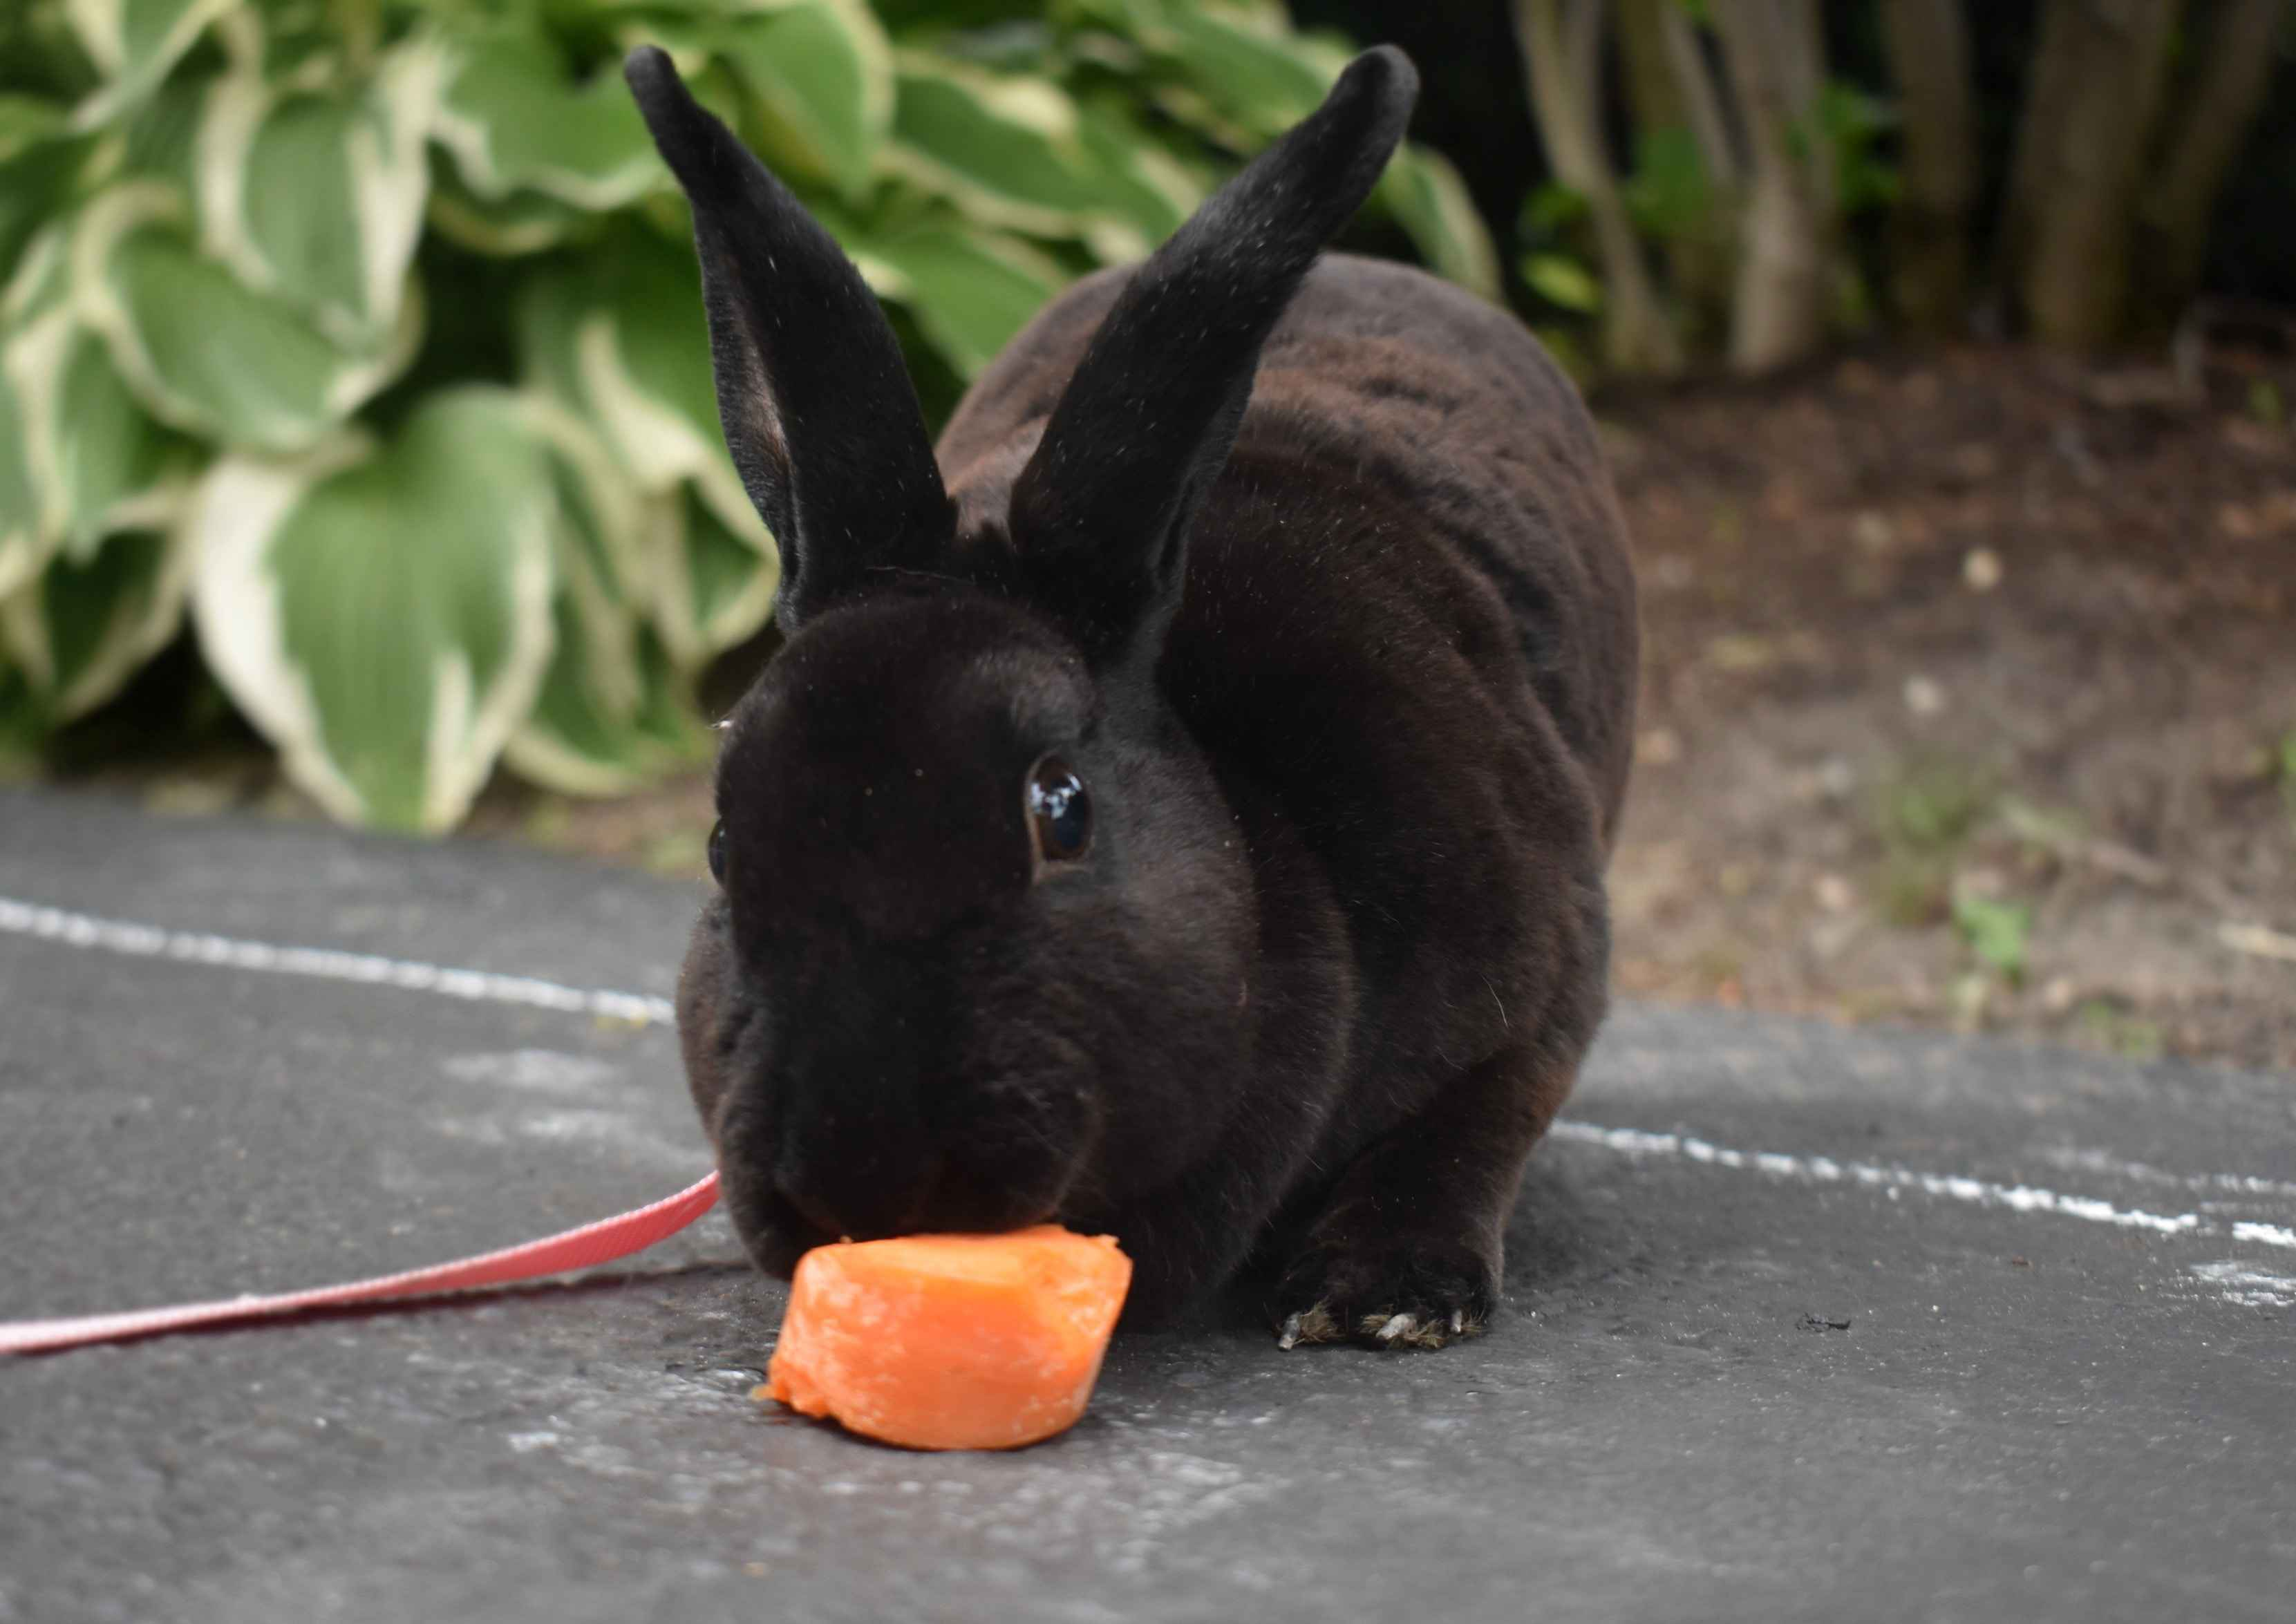 Ear Infections in Rabbits: Recognizing the Symptoms and Taking Action